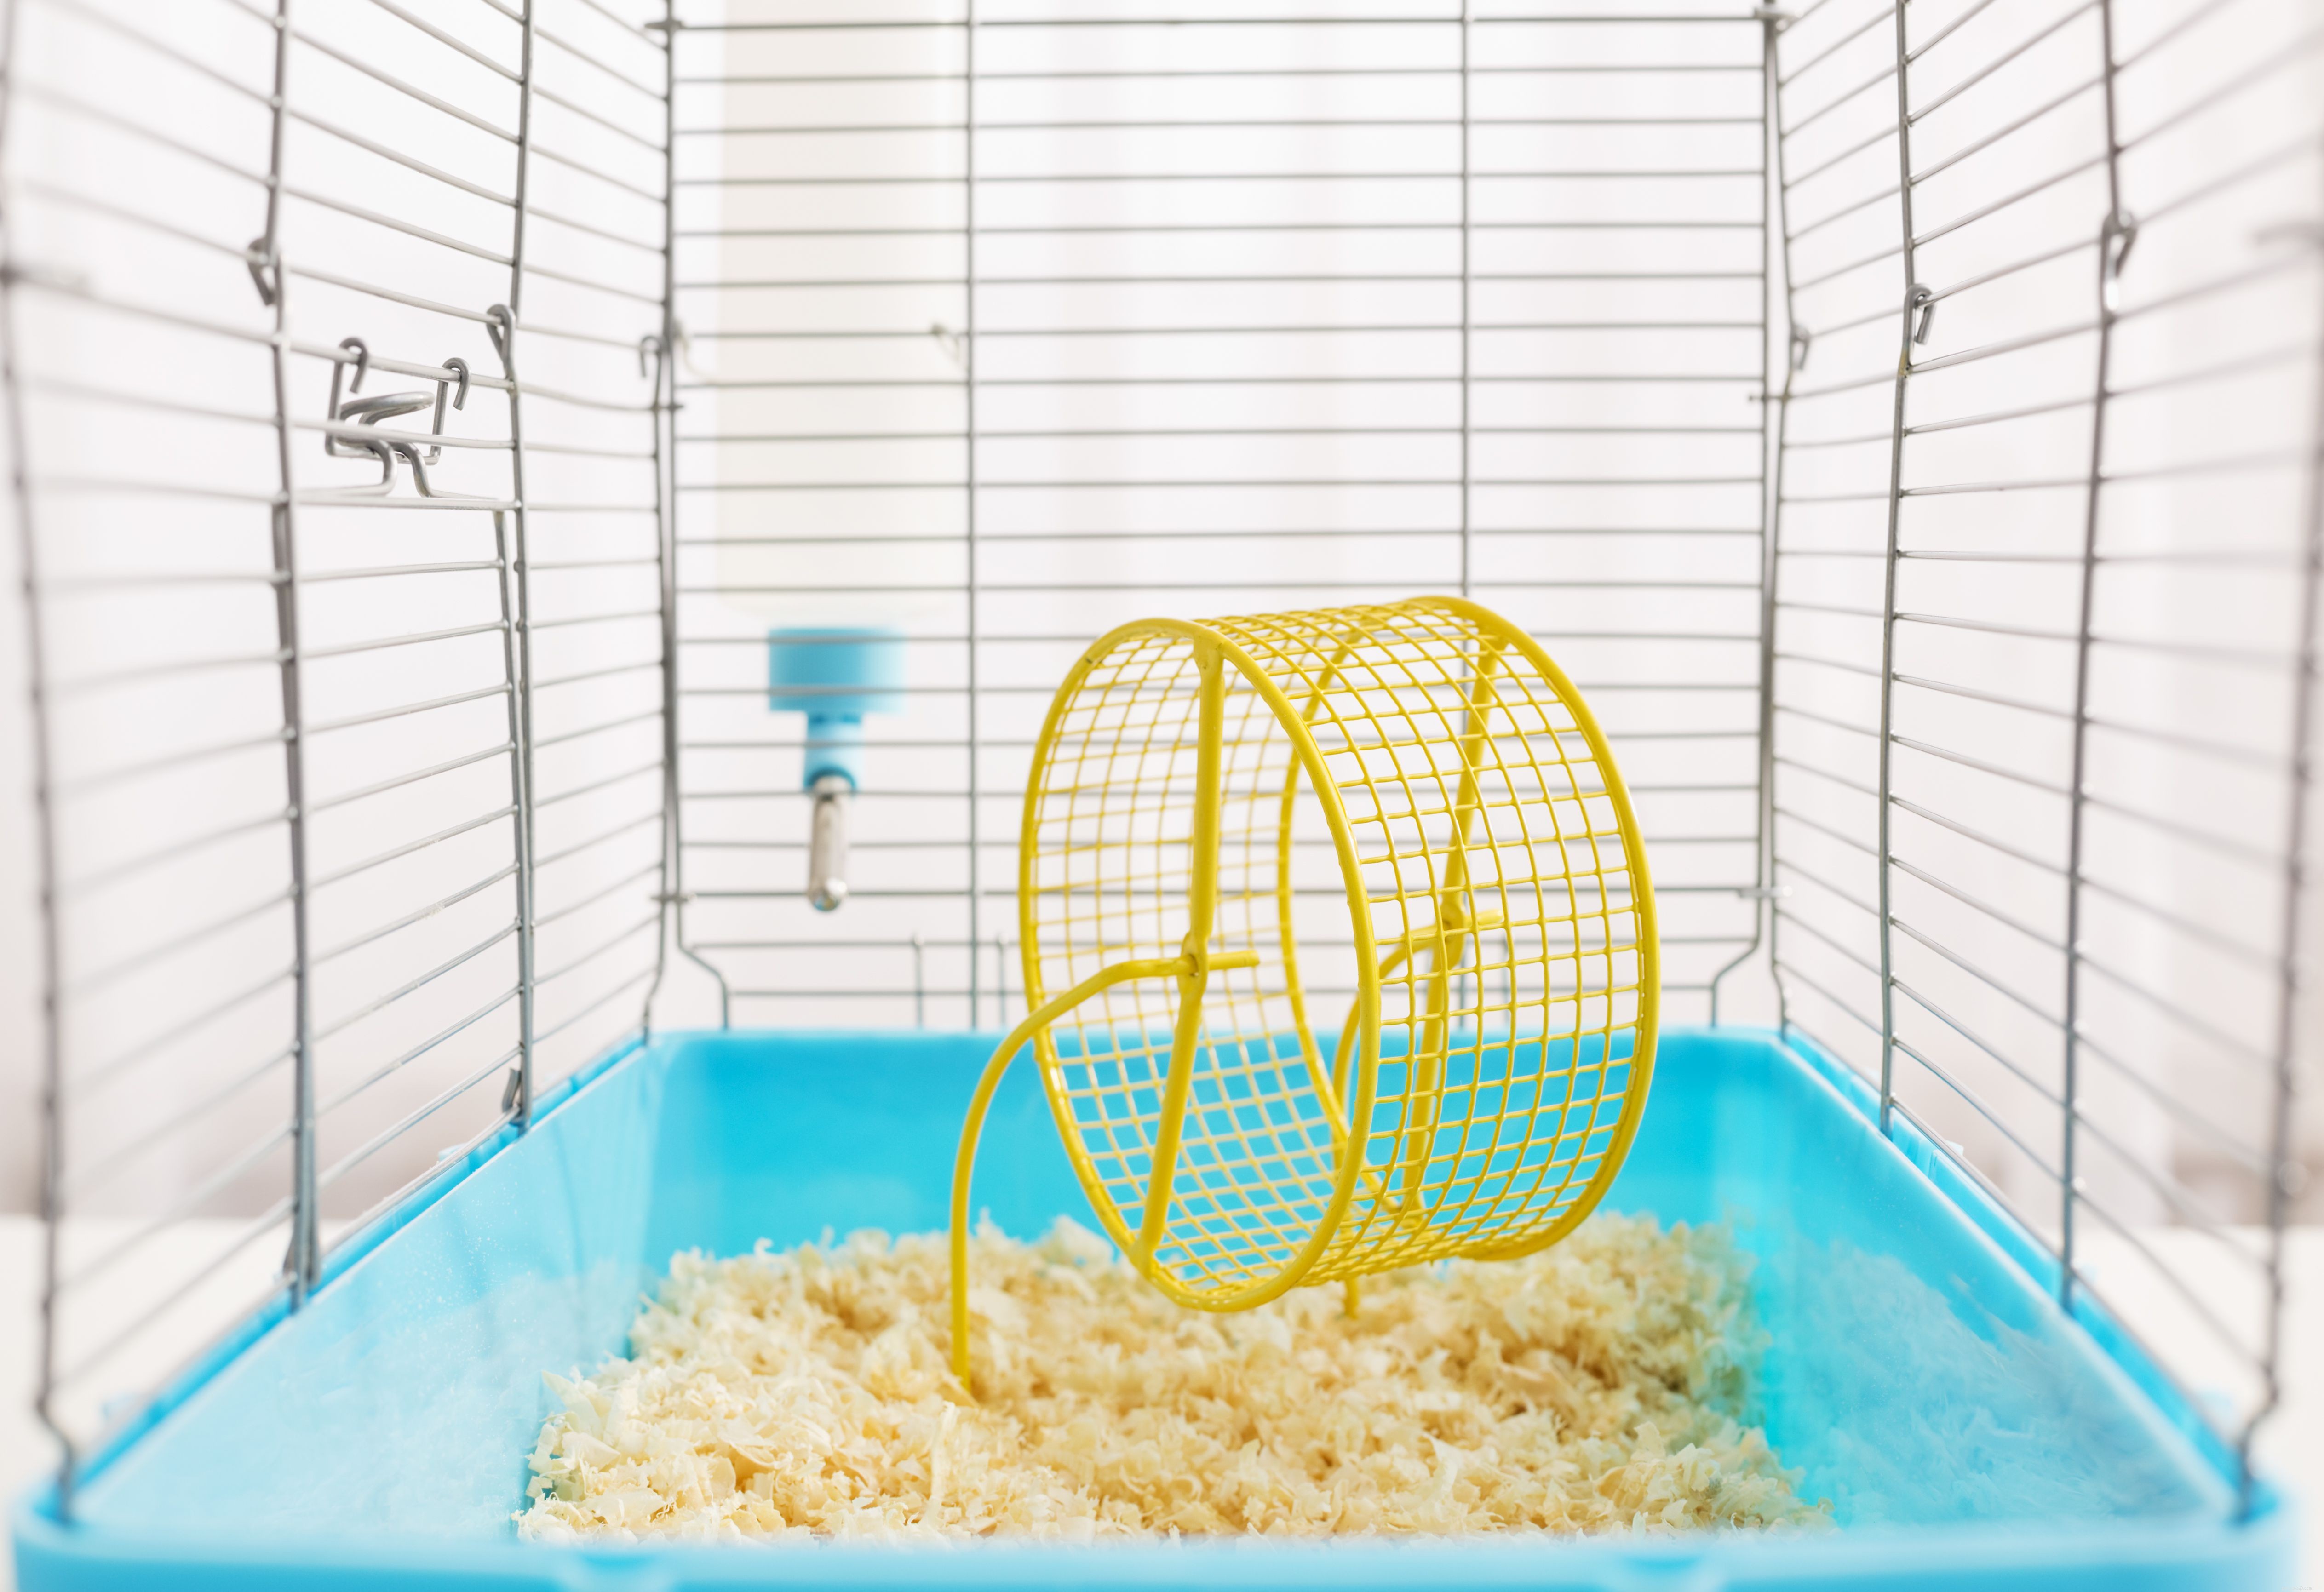 Choisir une cage pour hamster nain